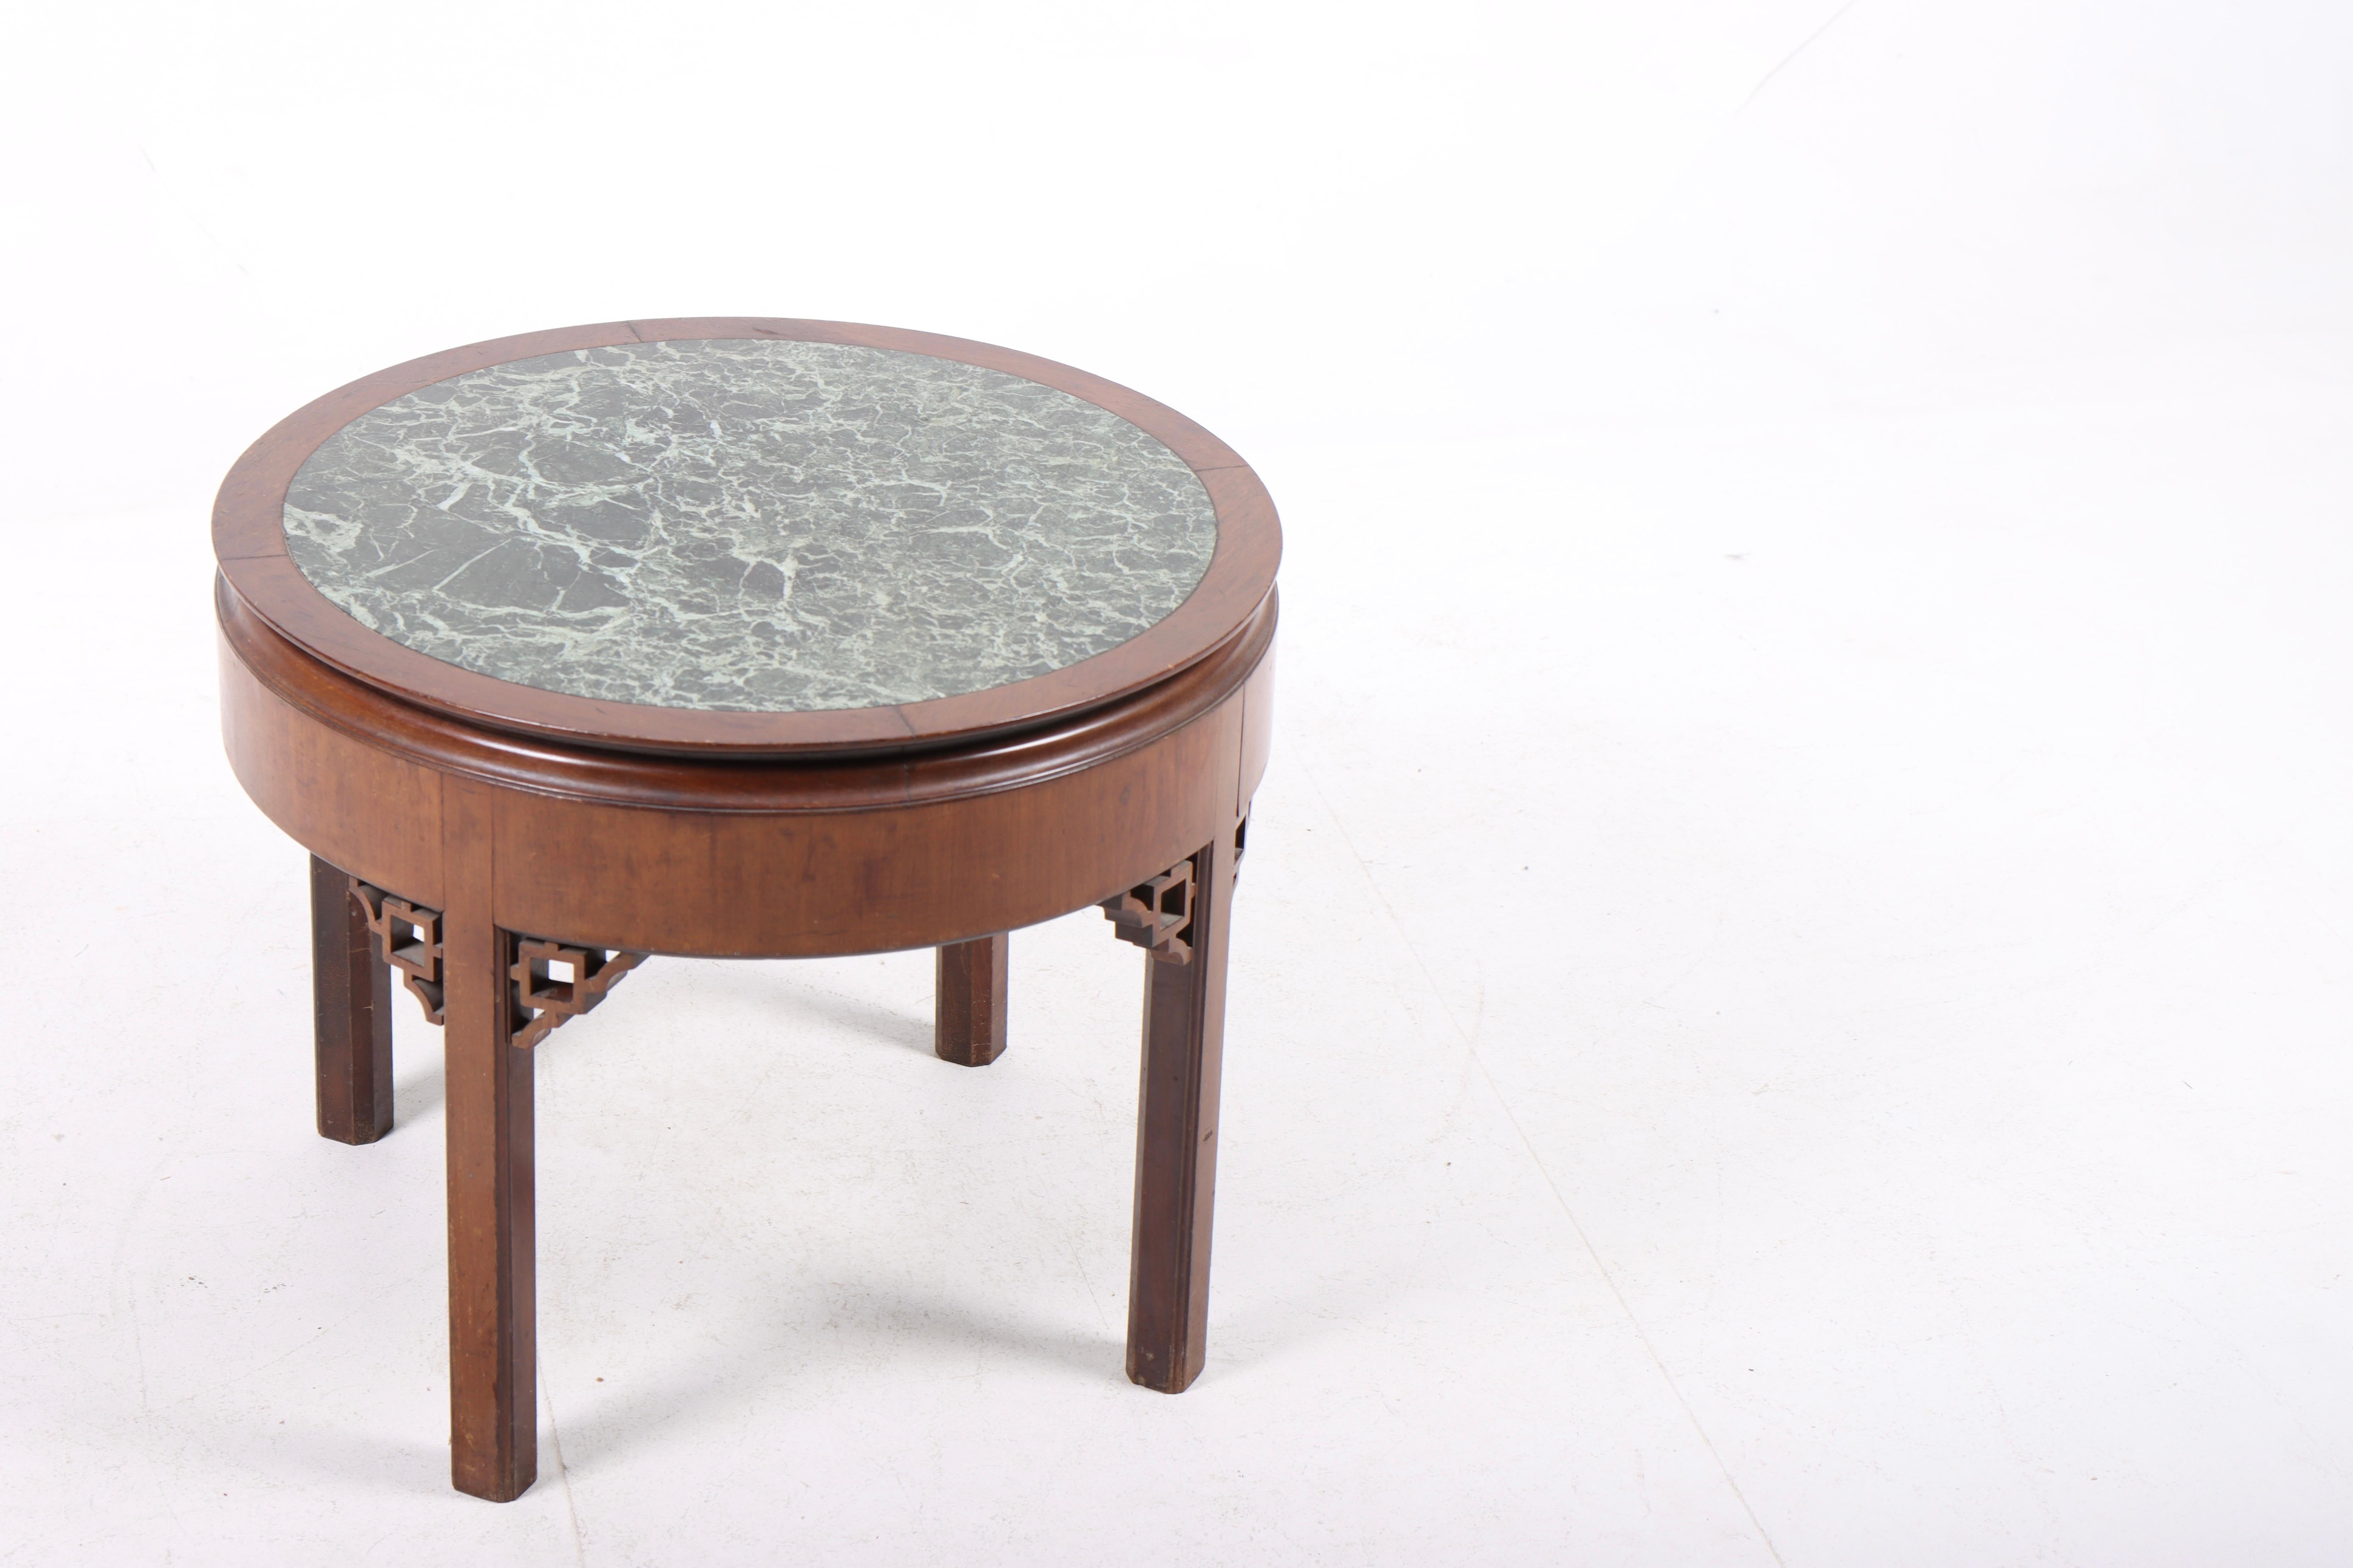 Mid-20th Century Low Table in Mahogany and Marble, Made in Denmark 1930s For Sale